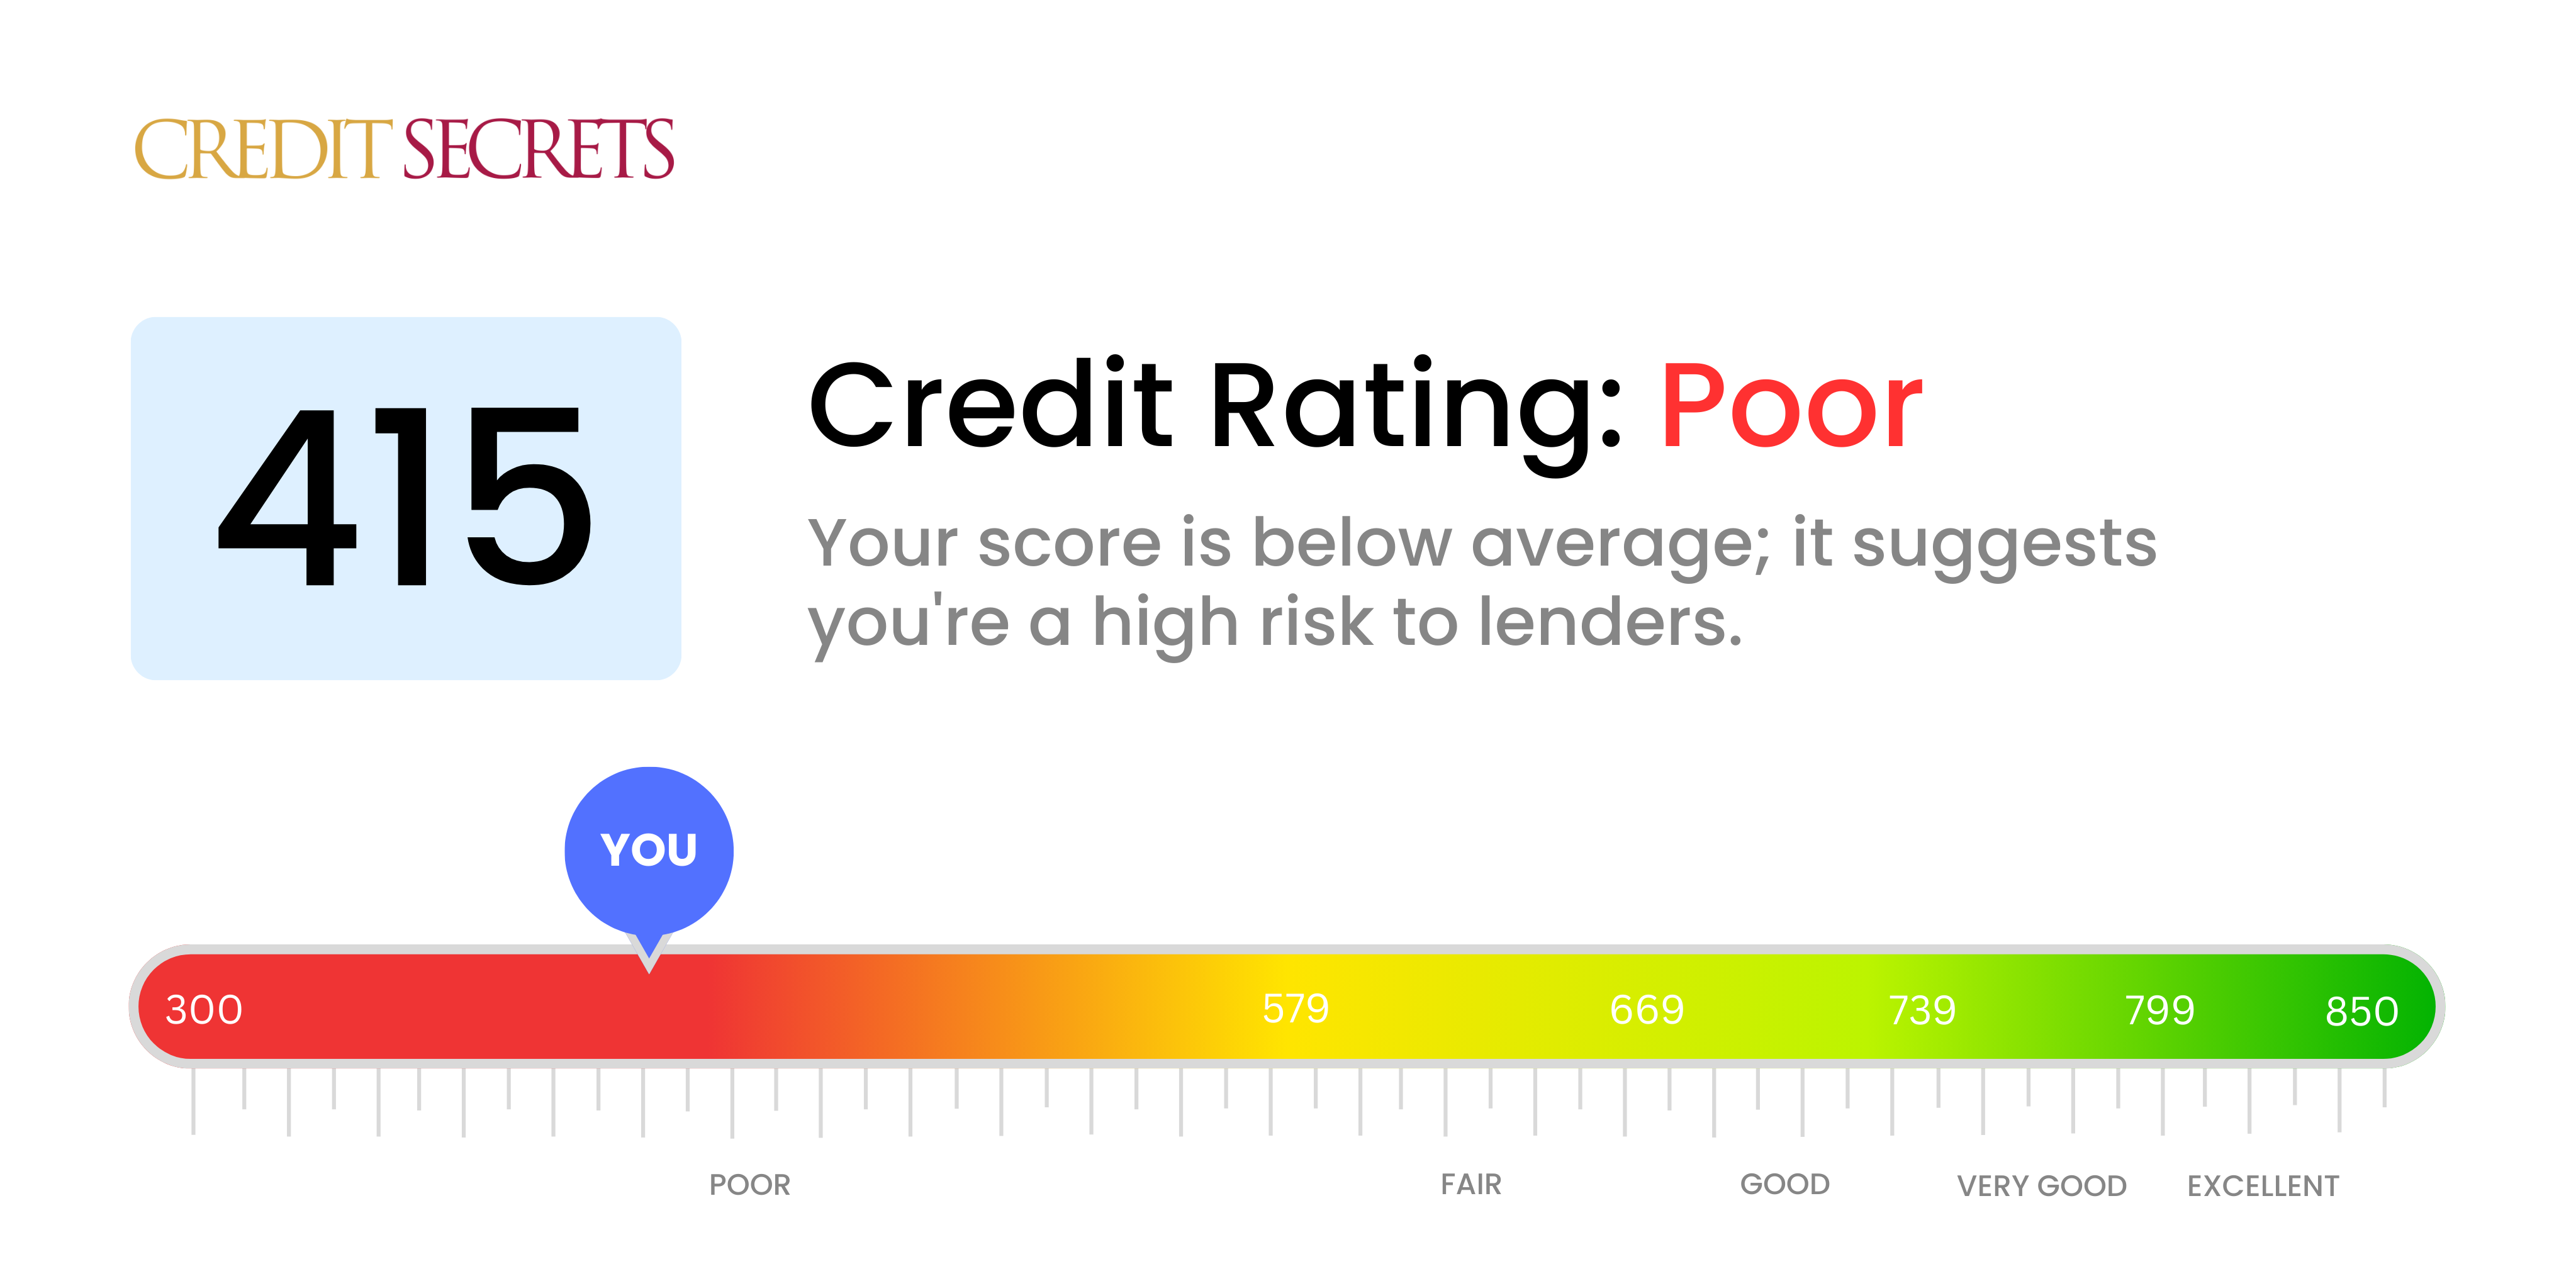 Is 415 a good credit score?